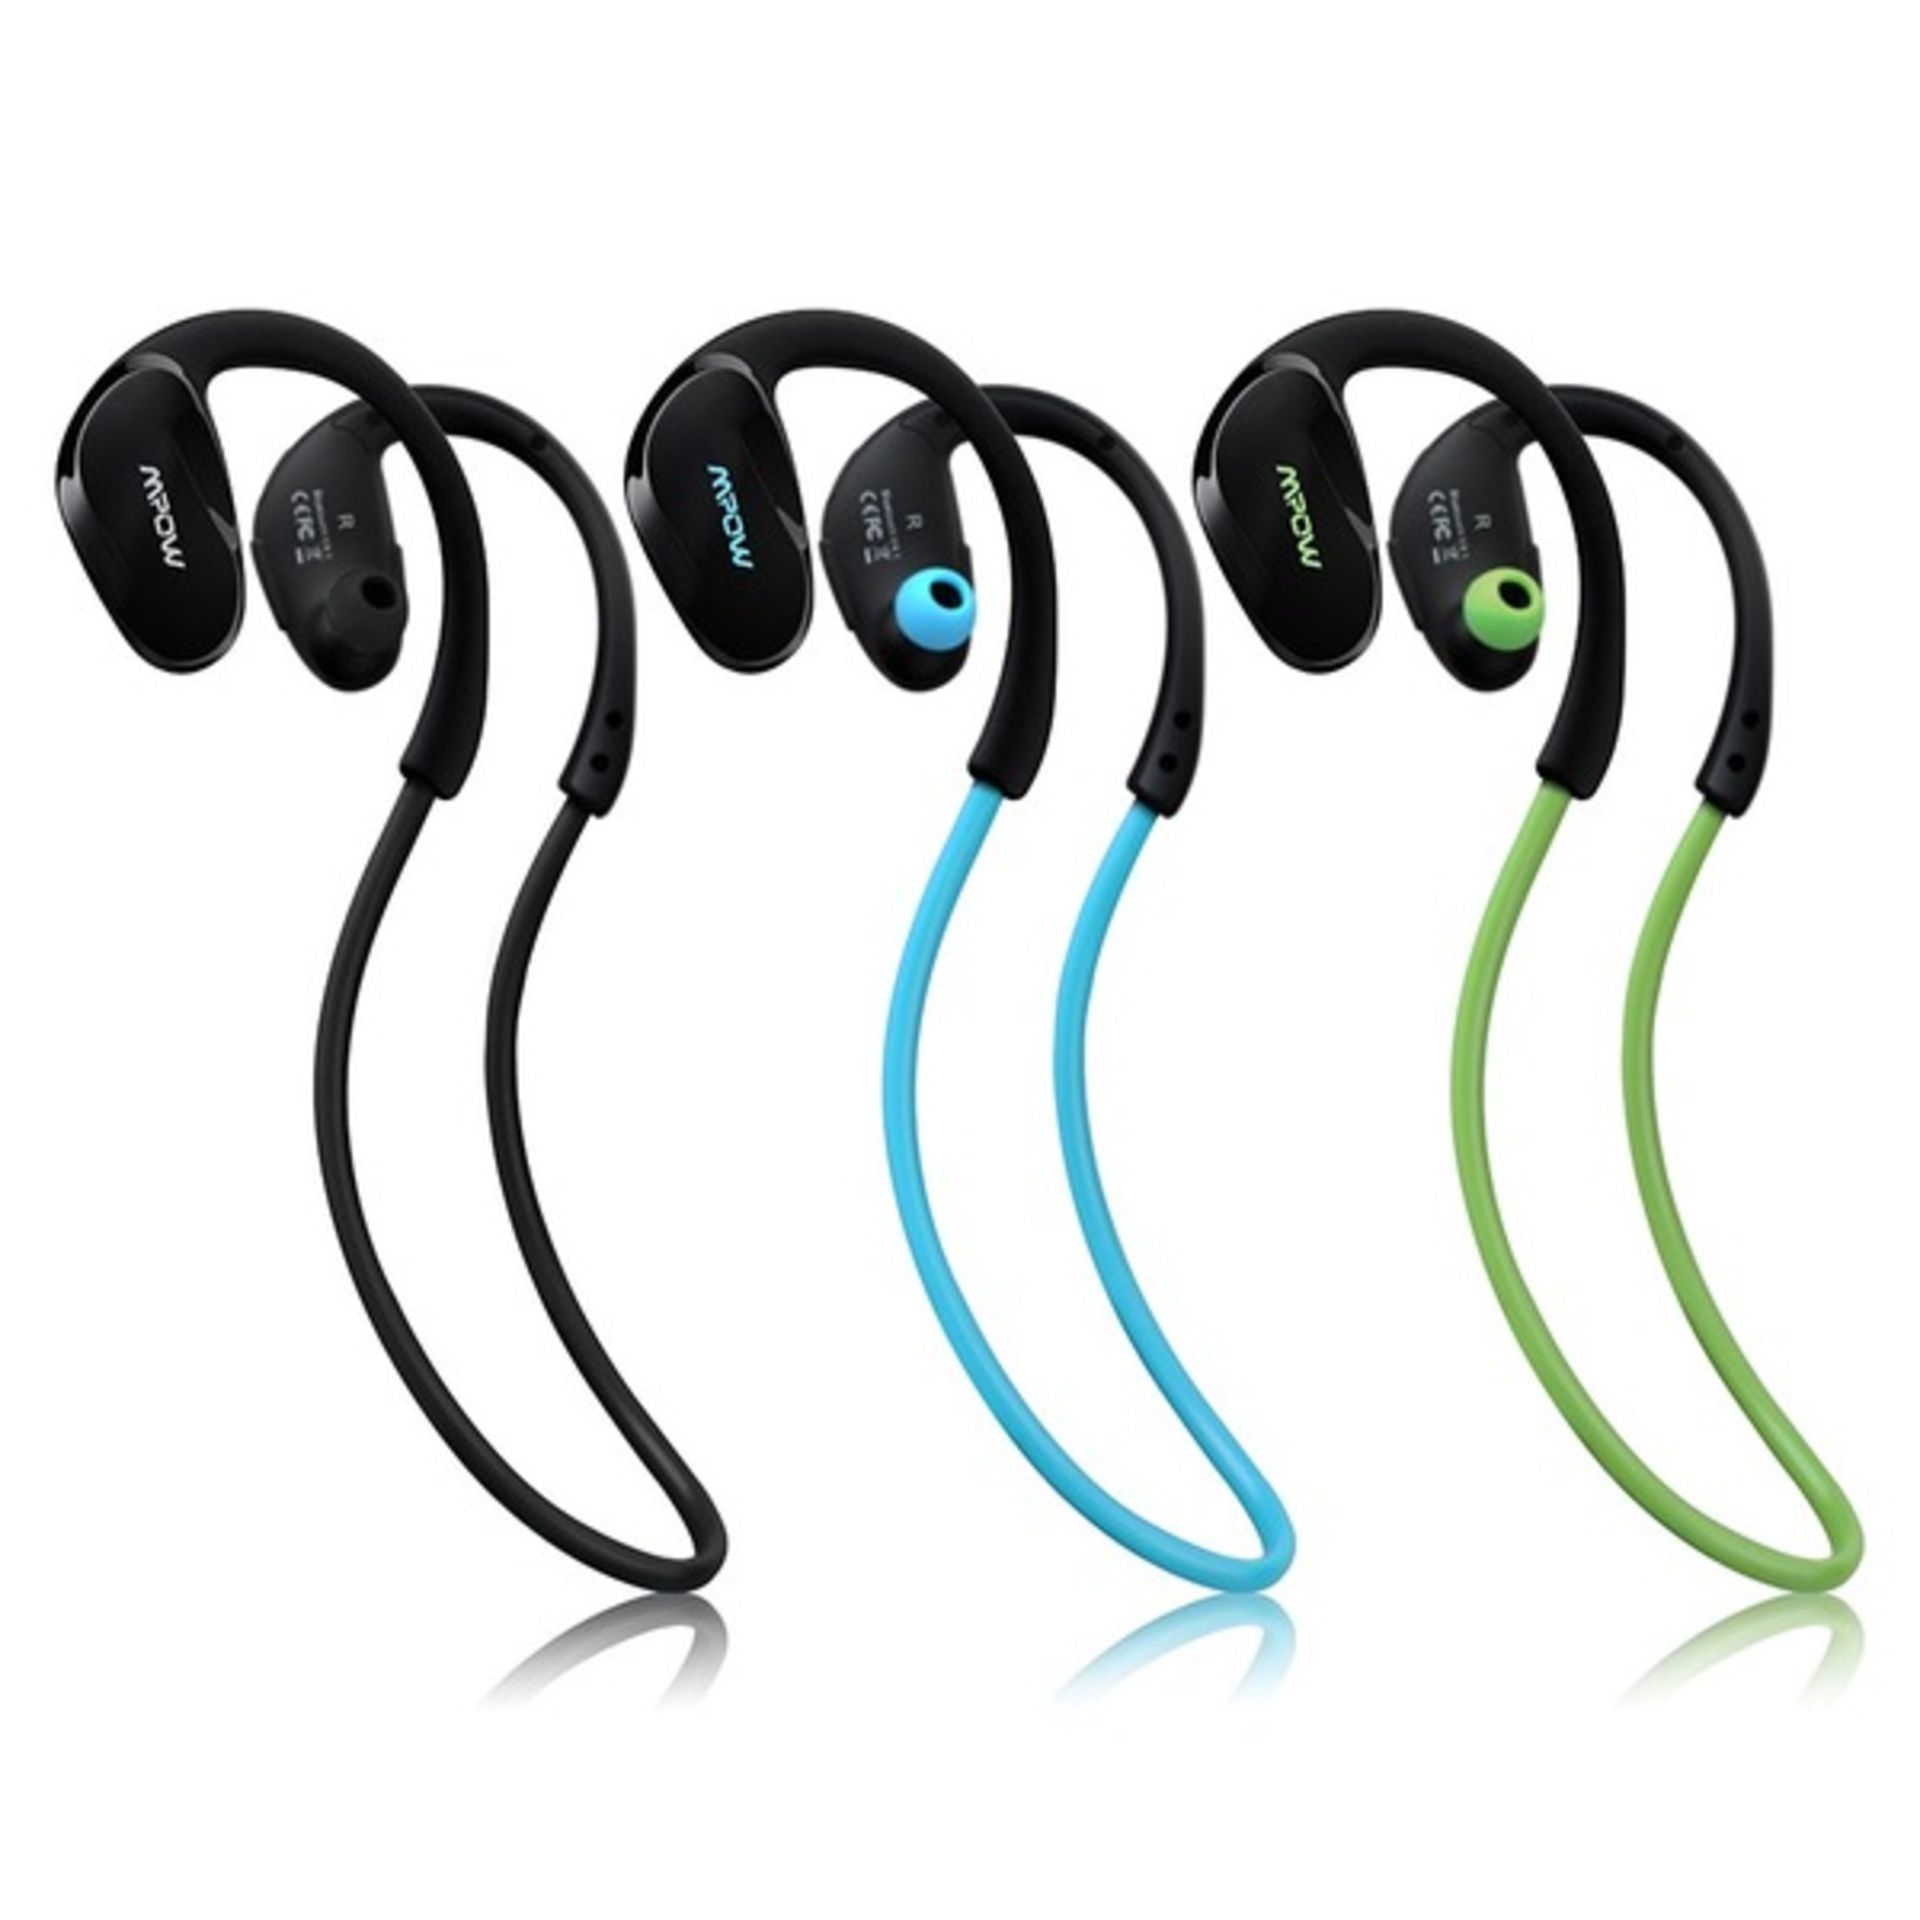 V Brand New Pair of Bluetooth Earphones/Headset (All Boxed) - Colours and Styles/Makes May Vary - - Image 3 of 7